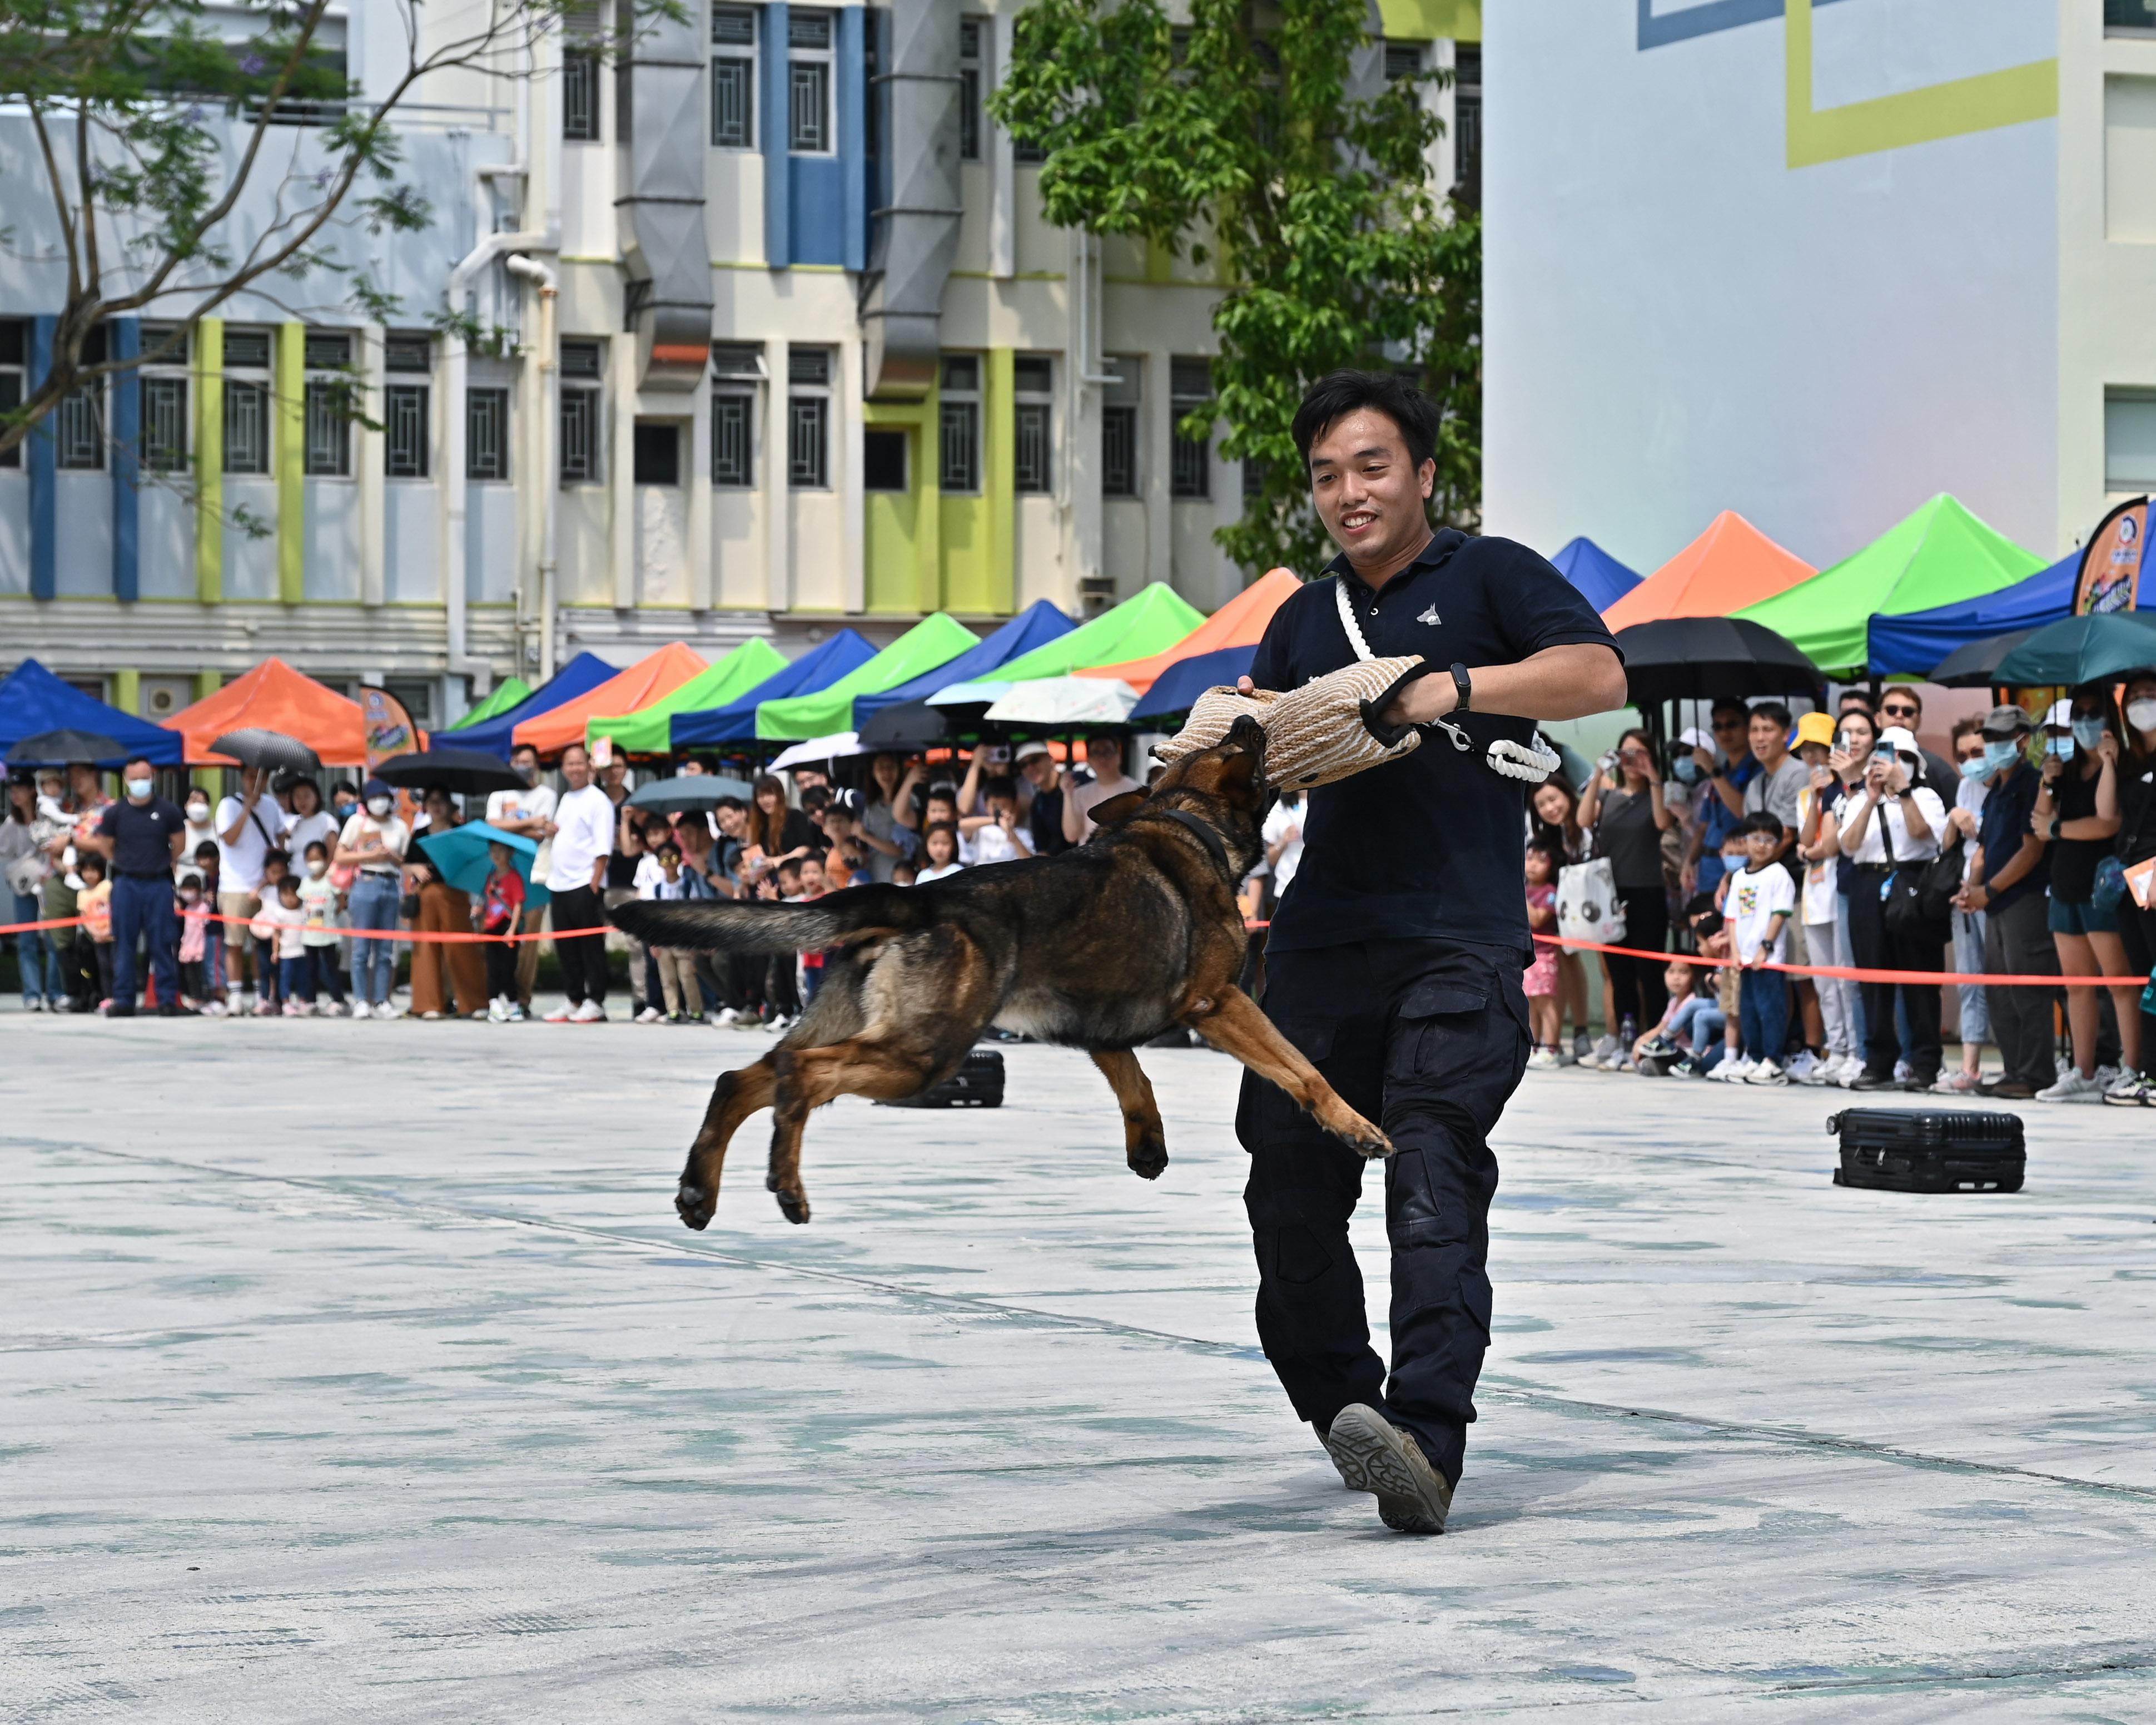 The Public Relations Wing of the Hong Kong Police Force organised the “JPC@PH Fun Day” at the Junior Police Call Permanent Activity Centre on April 22 and 23. Photo shows the performance of the Police Dog Unit.